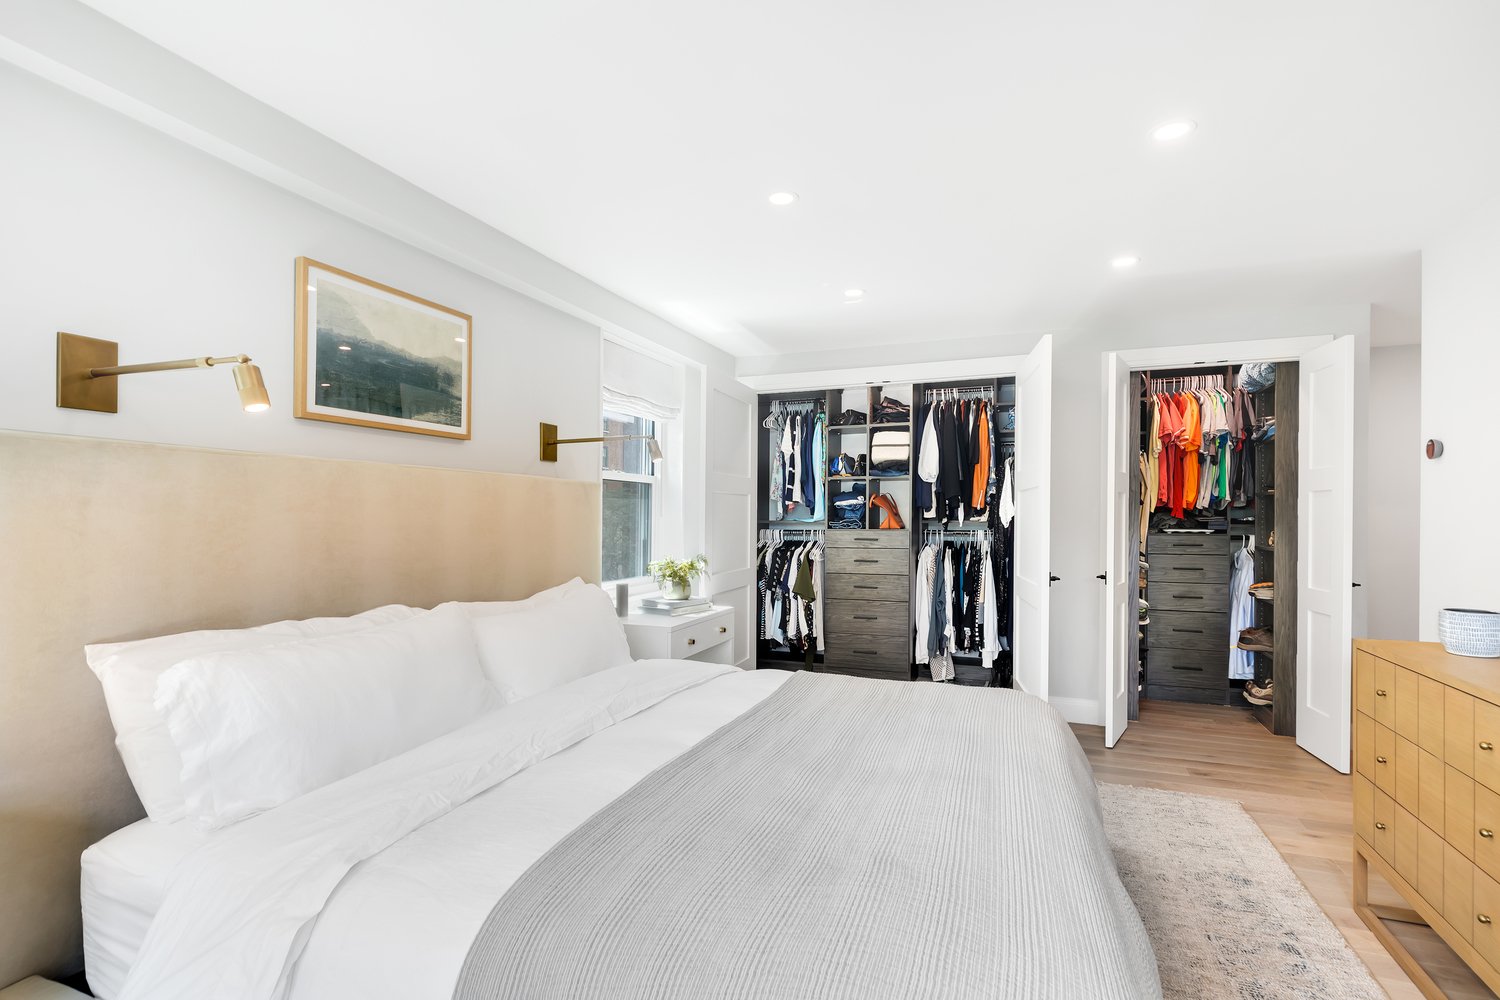 Remodeled bedroom with light wood floors, large closets, and white walls.